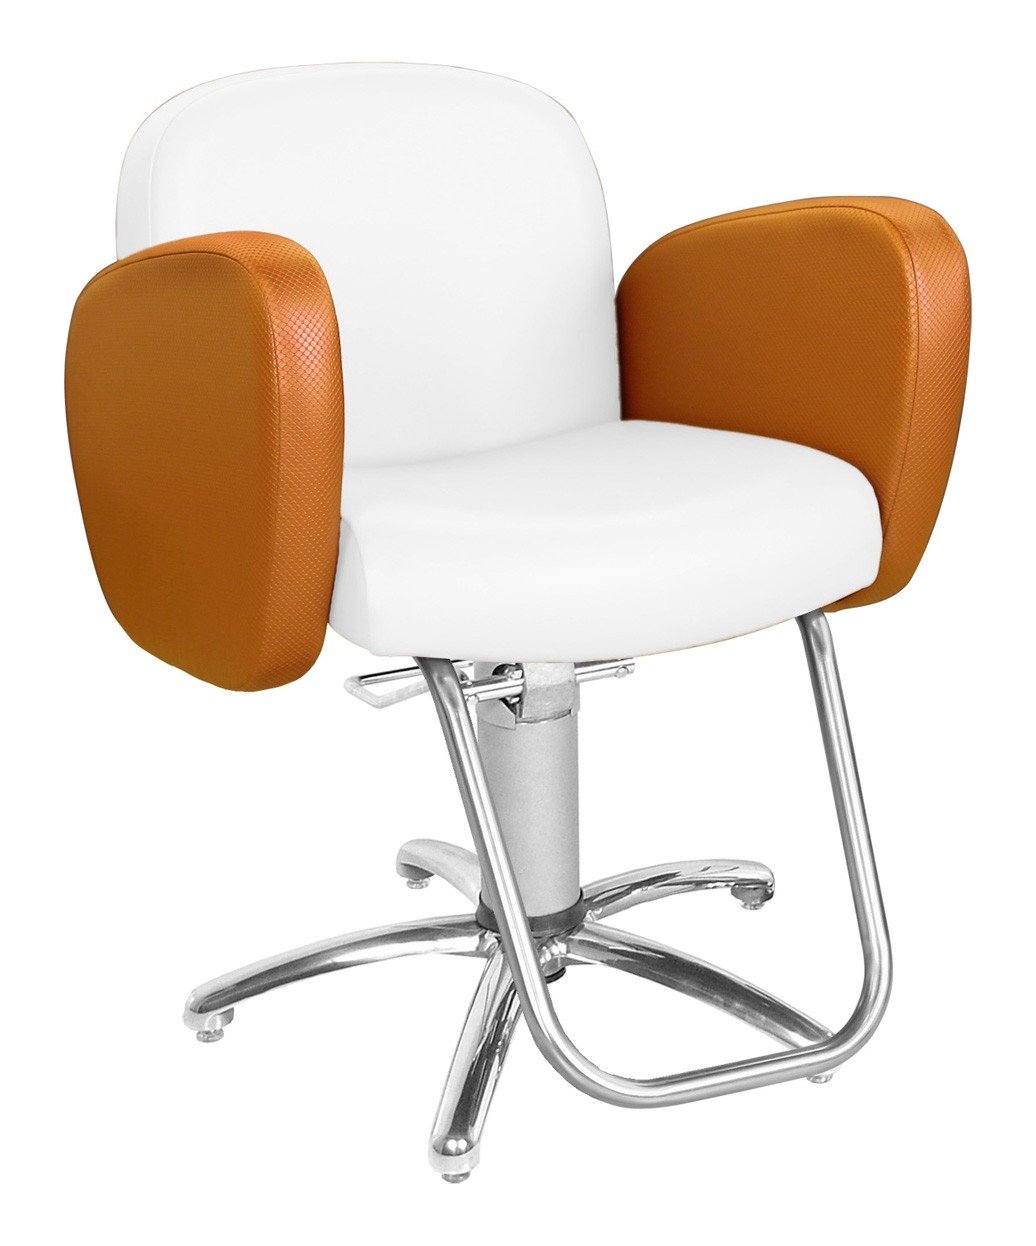 Collins 7200 ATL Styling Chair